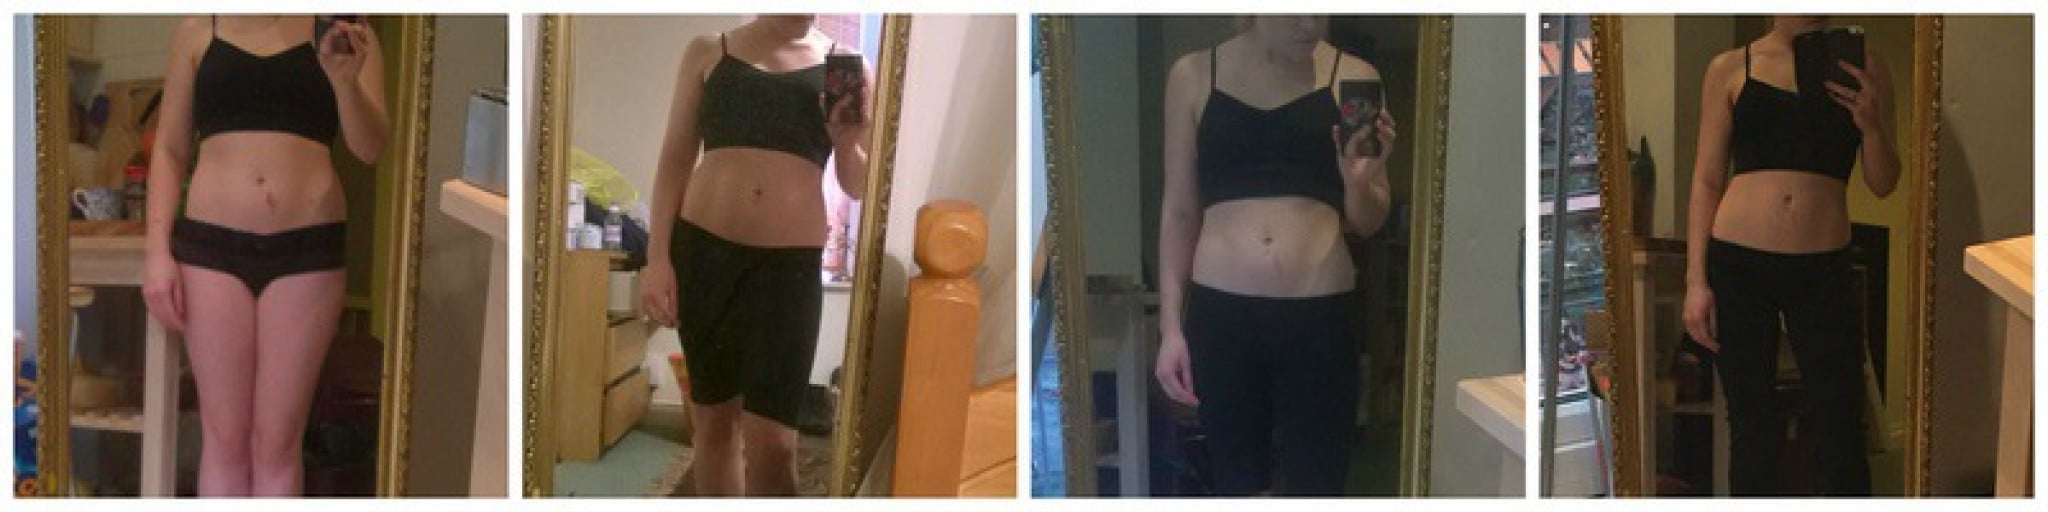 A progress pic of a 5'3" woman showing a fat loss from 134 pounds to 121 pounds. A respectable loss of 13 pounds.